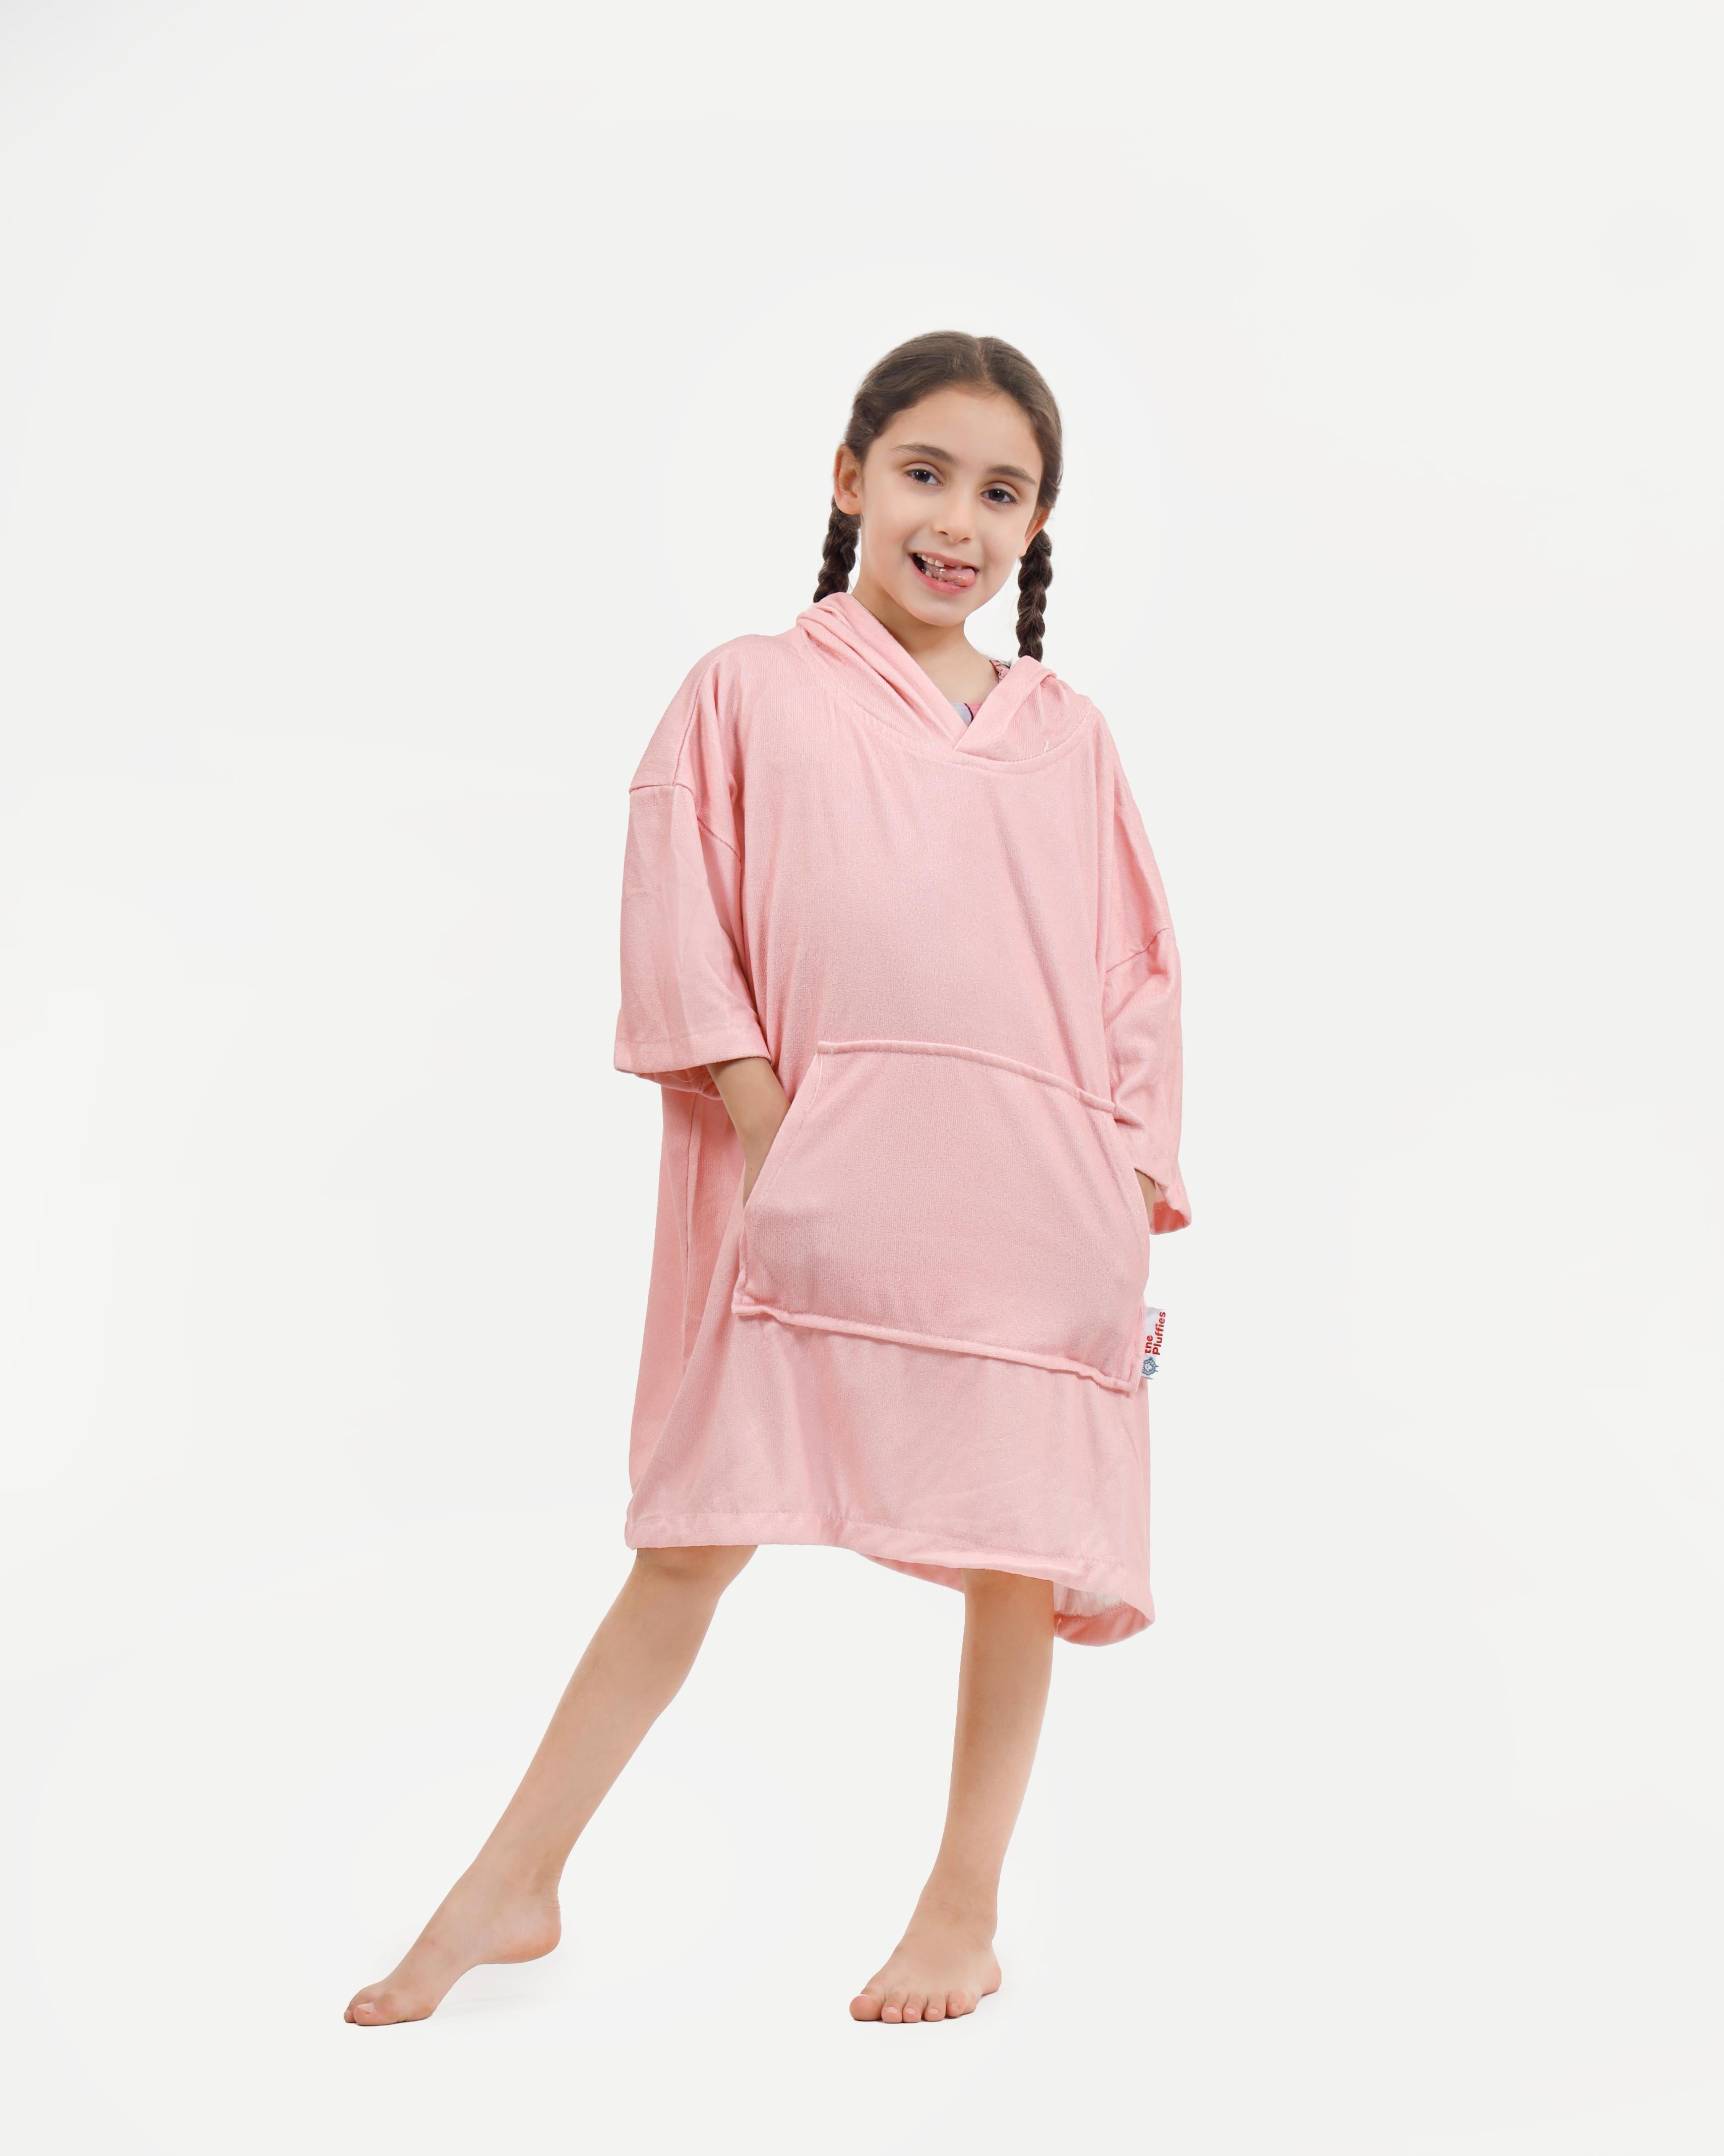 Pink Pluffie Kids Towel Poncho - THE PLUFFIES